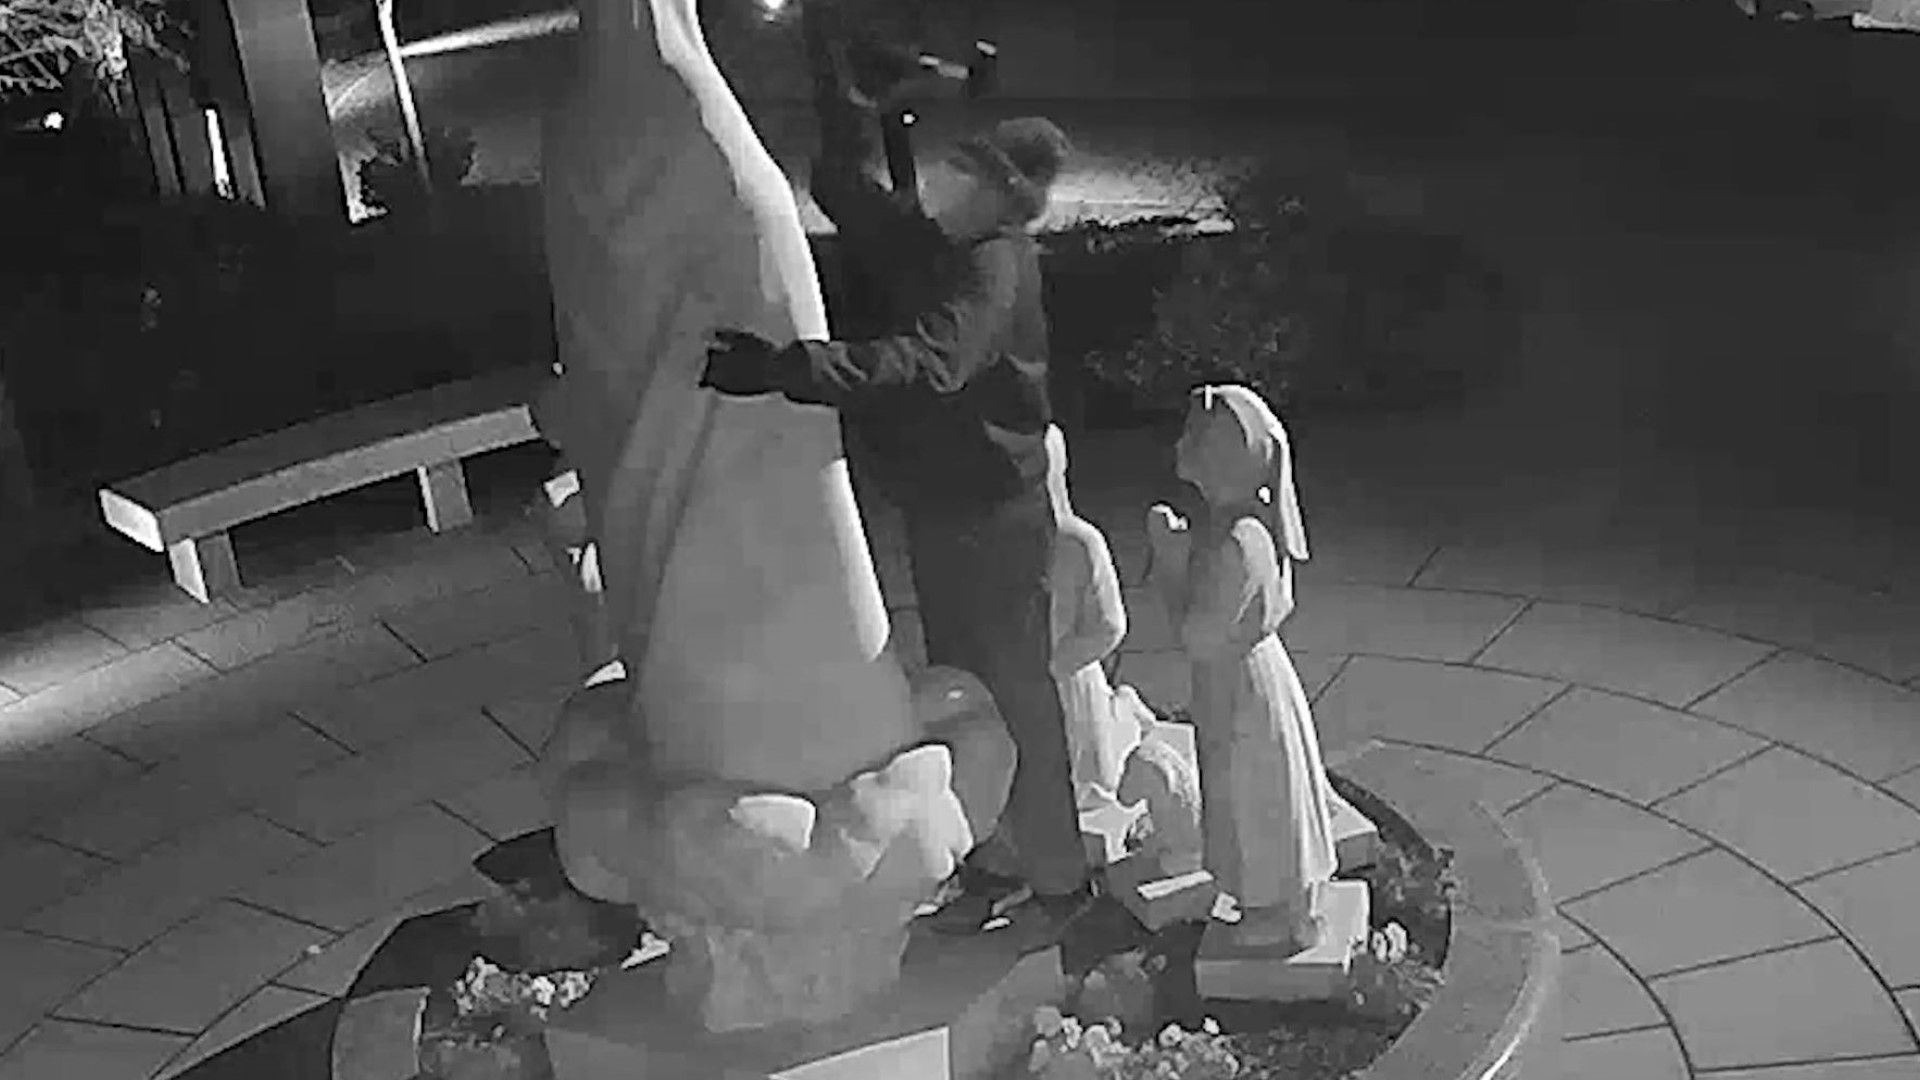 A man was caught on camera cutting off the hands of the statue and damaging the face with a hammer.